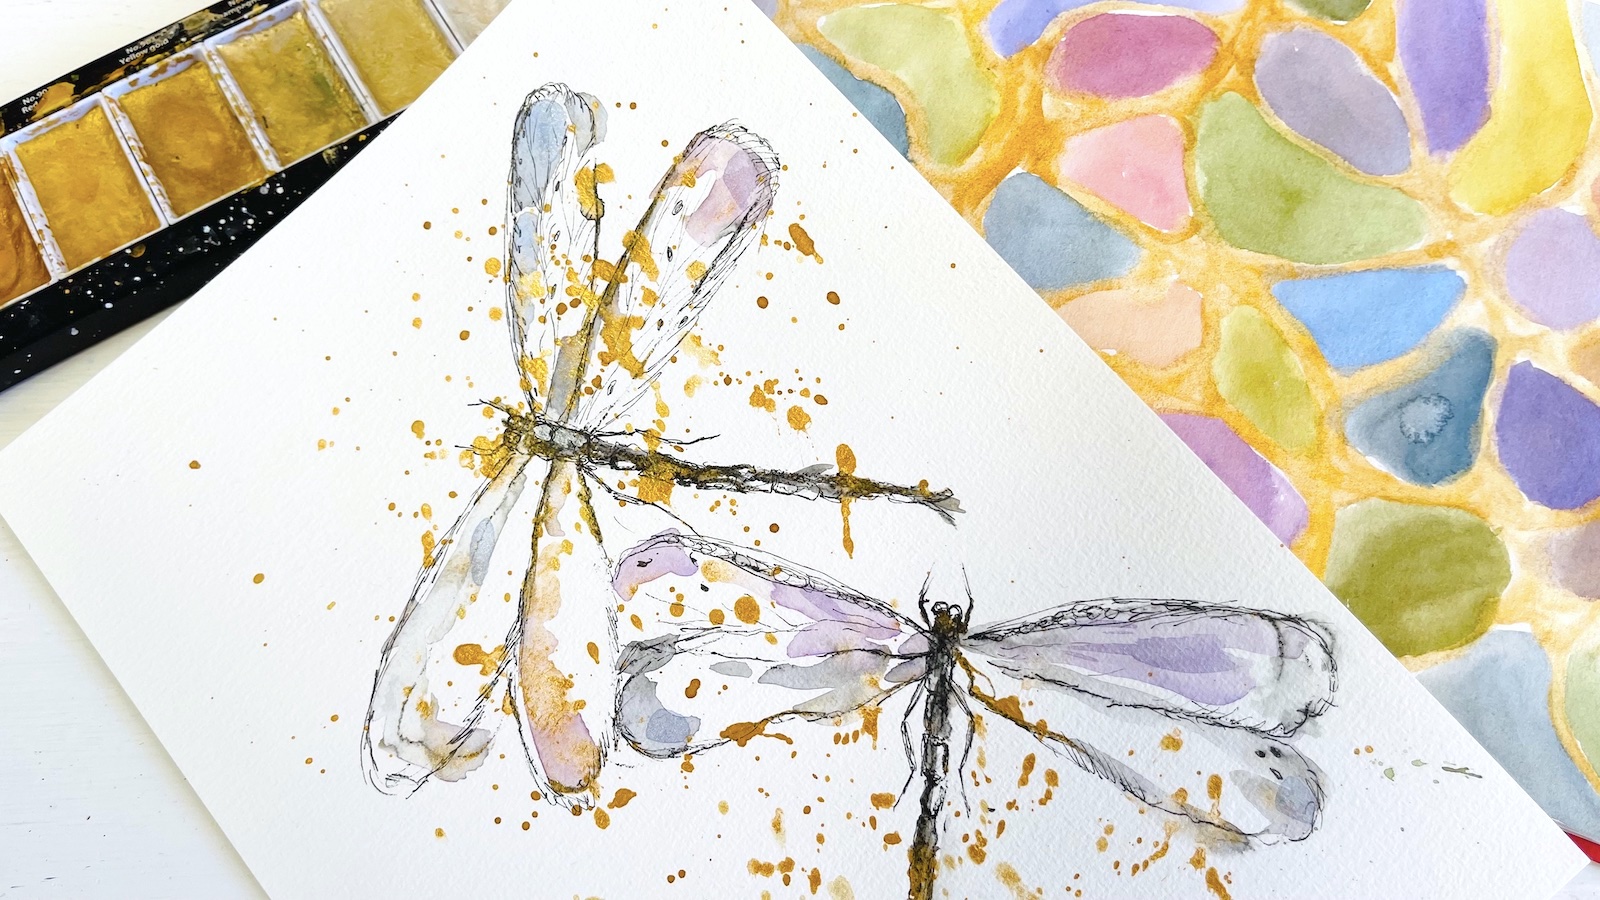 simple dragonfly drawings